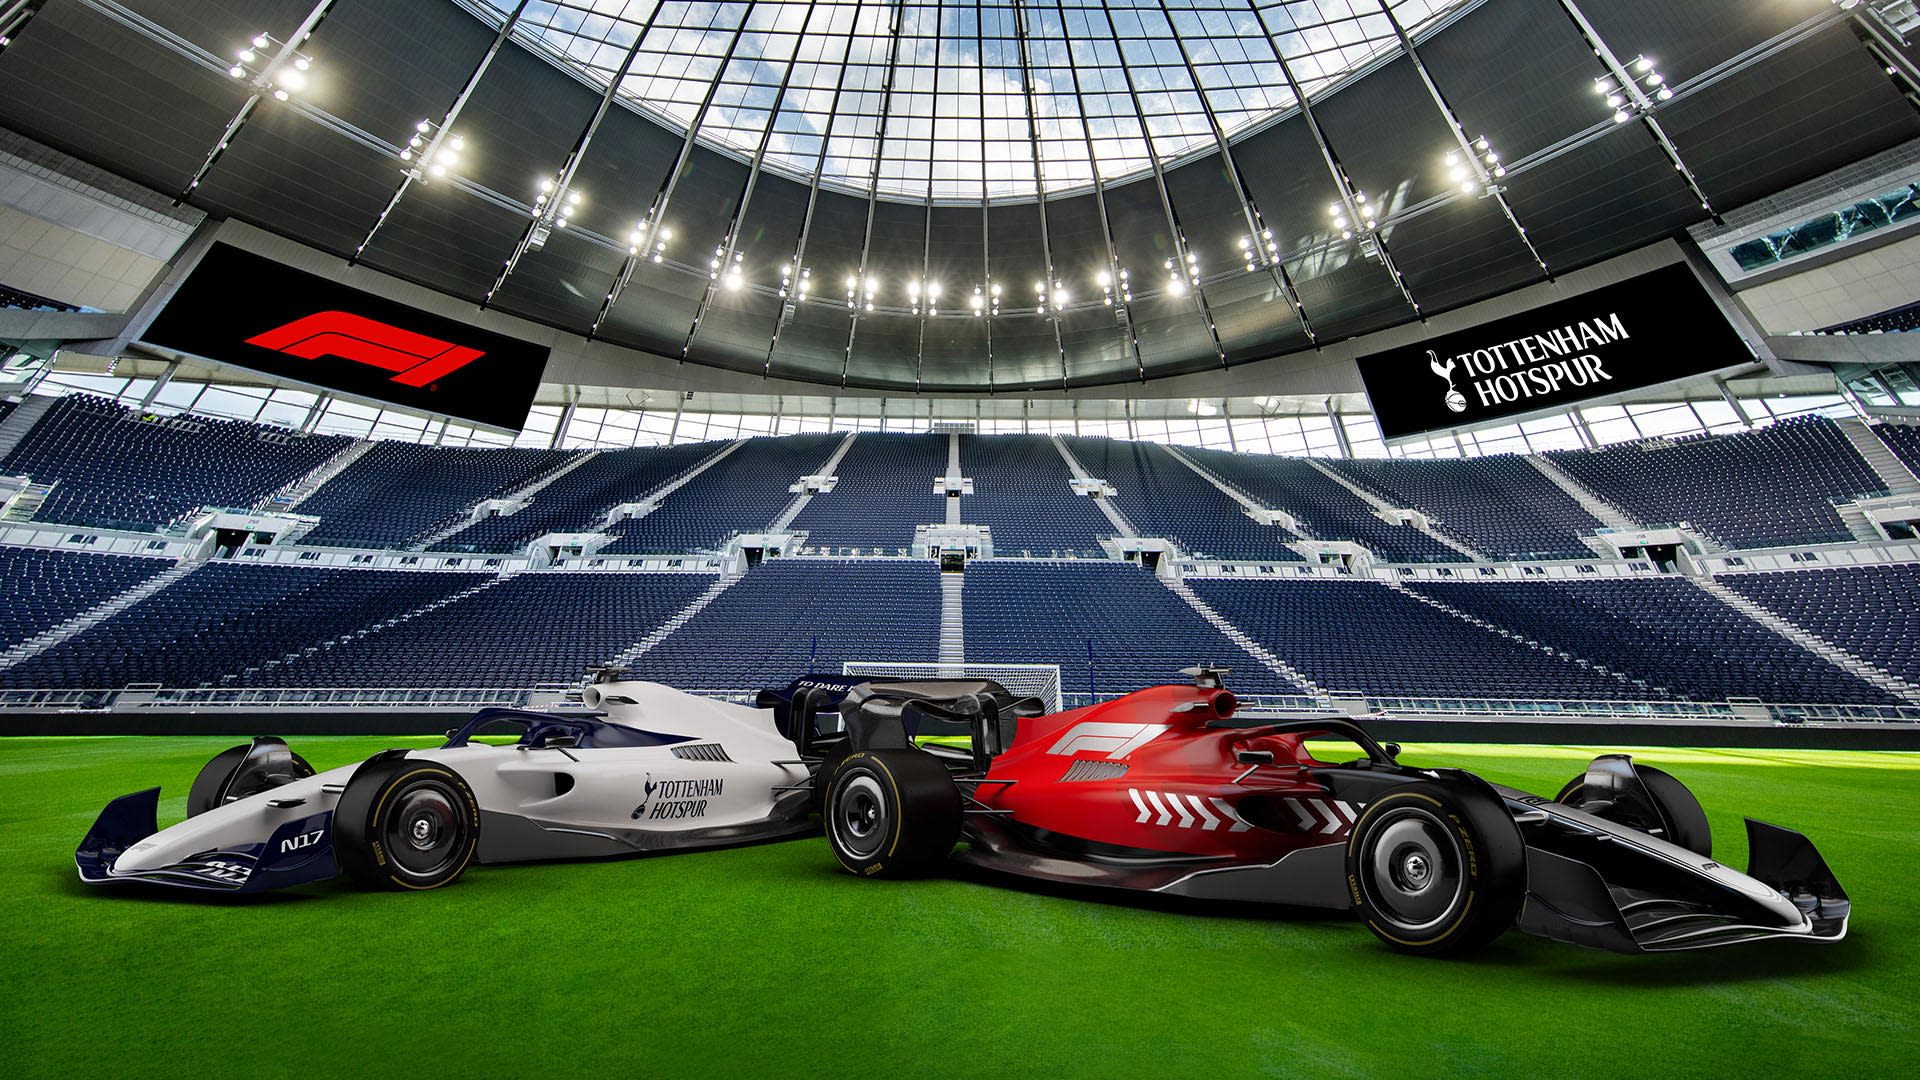 Formula 1 and Tottenham Hotspur FC join forces to find the next generation of F1 drivers Formula 1®